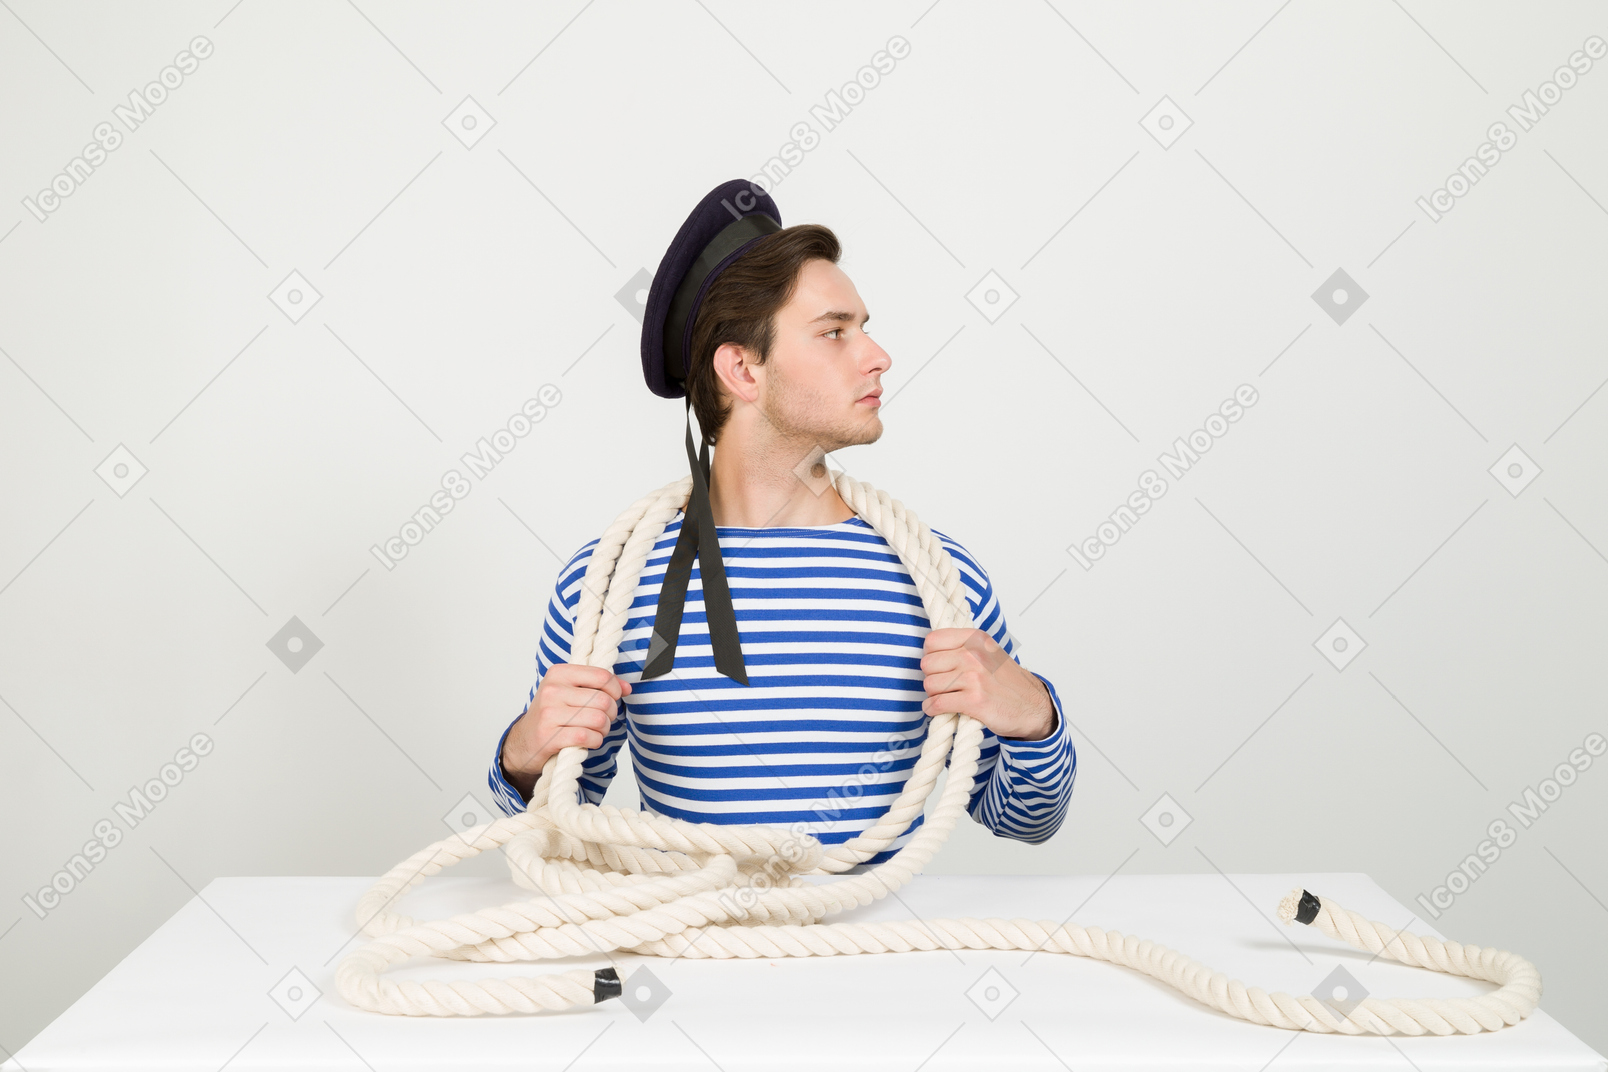 Sailor sitting at the table with marine rope on his neck and looking aside